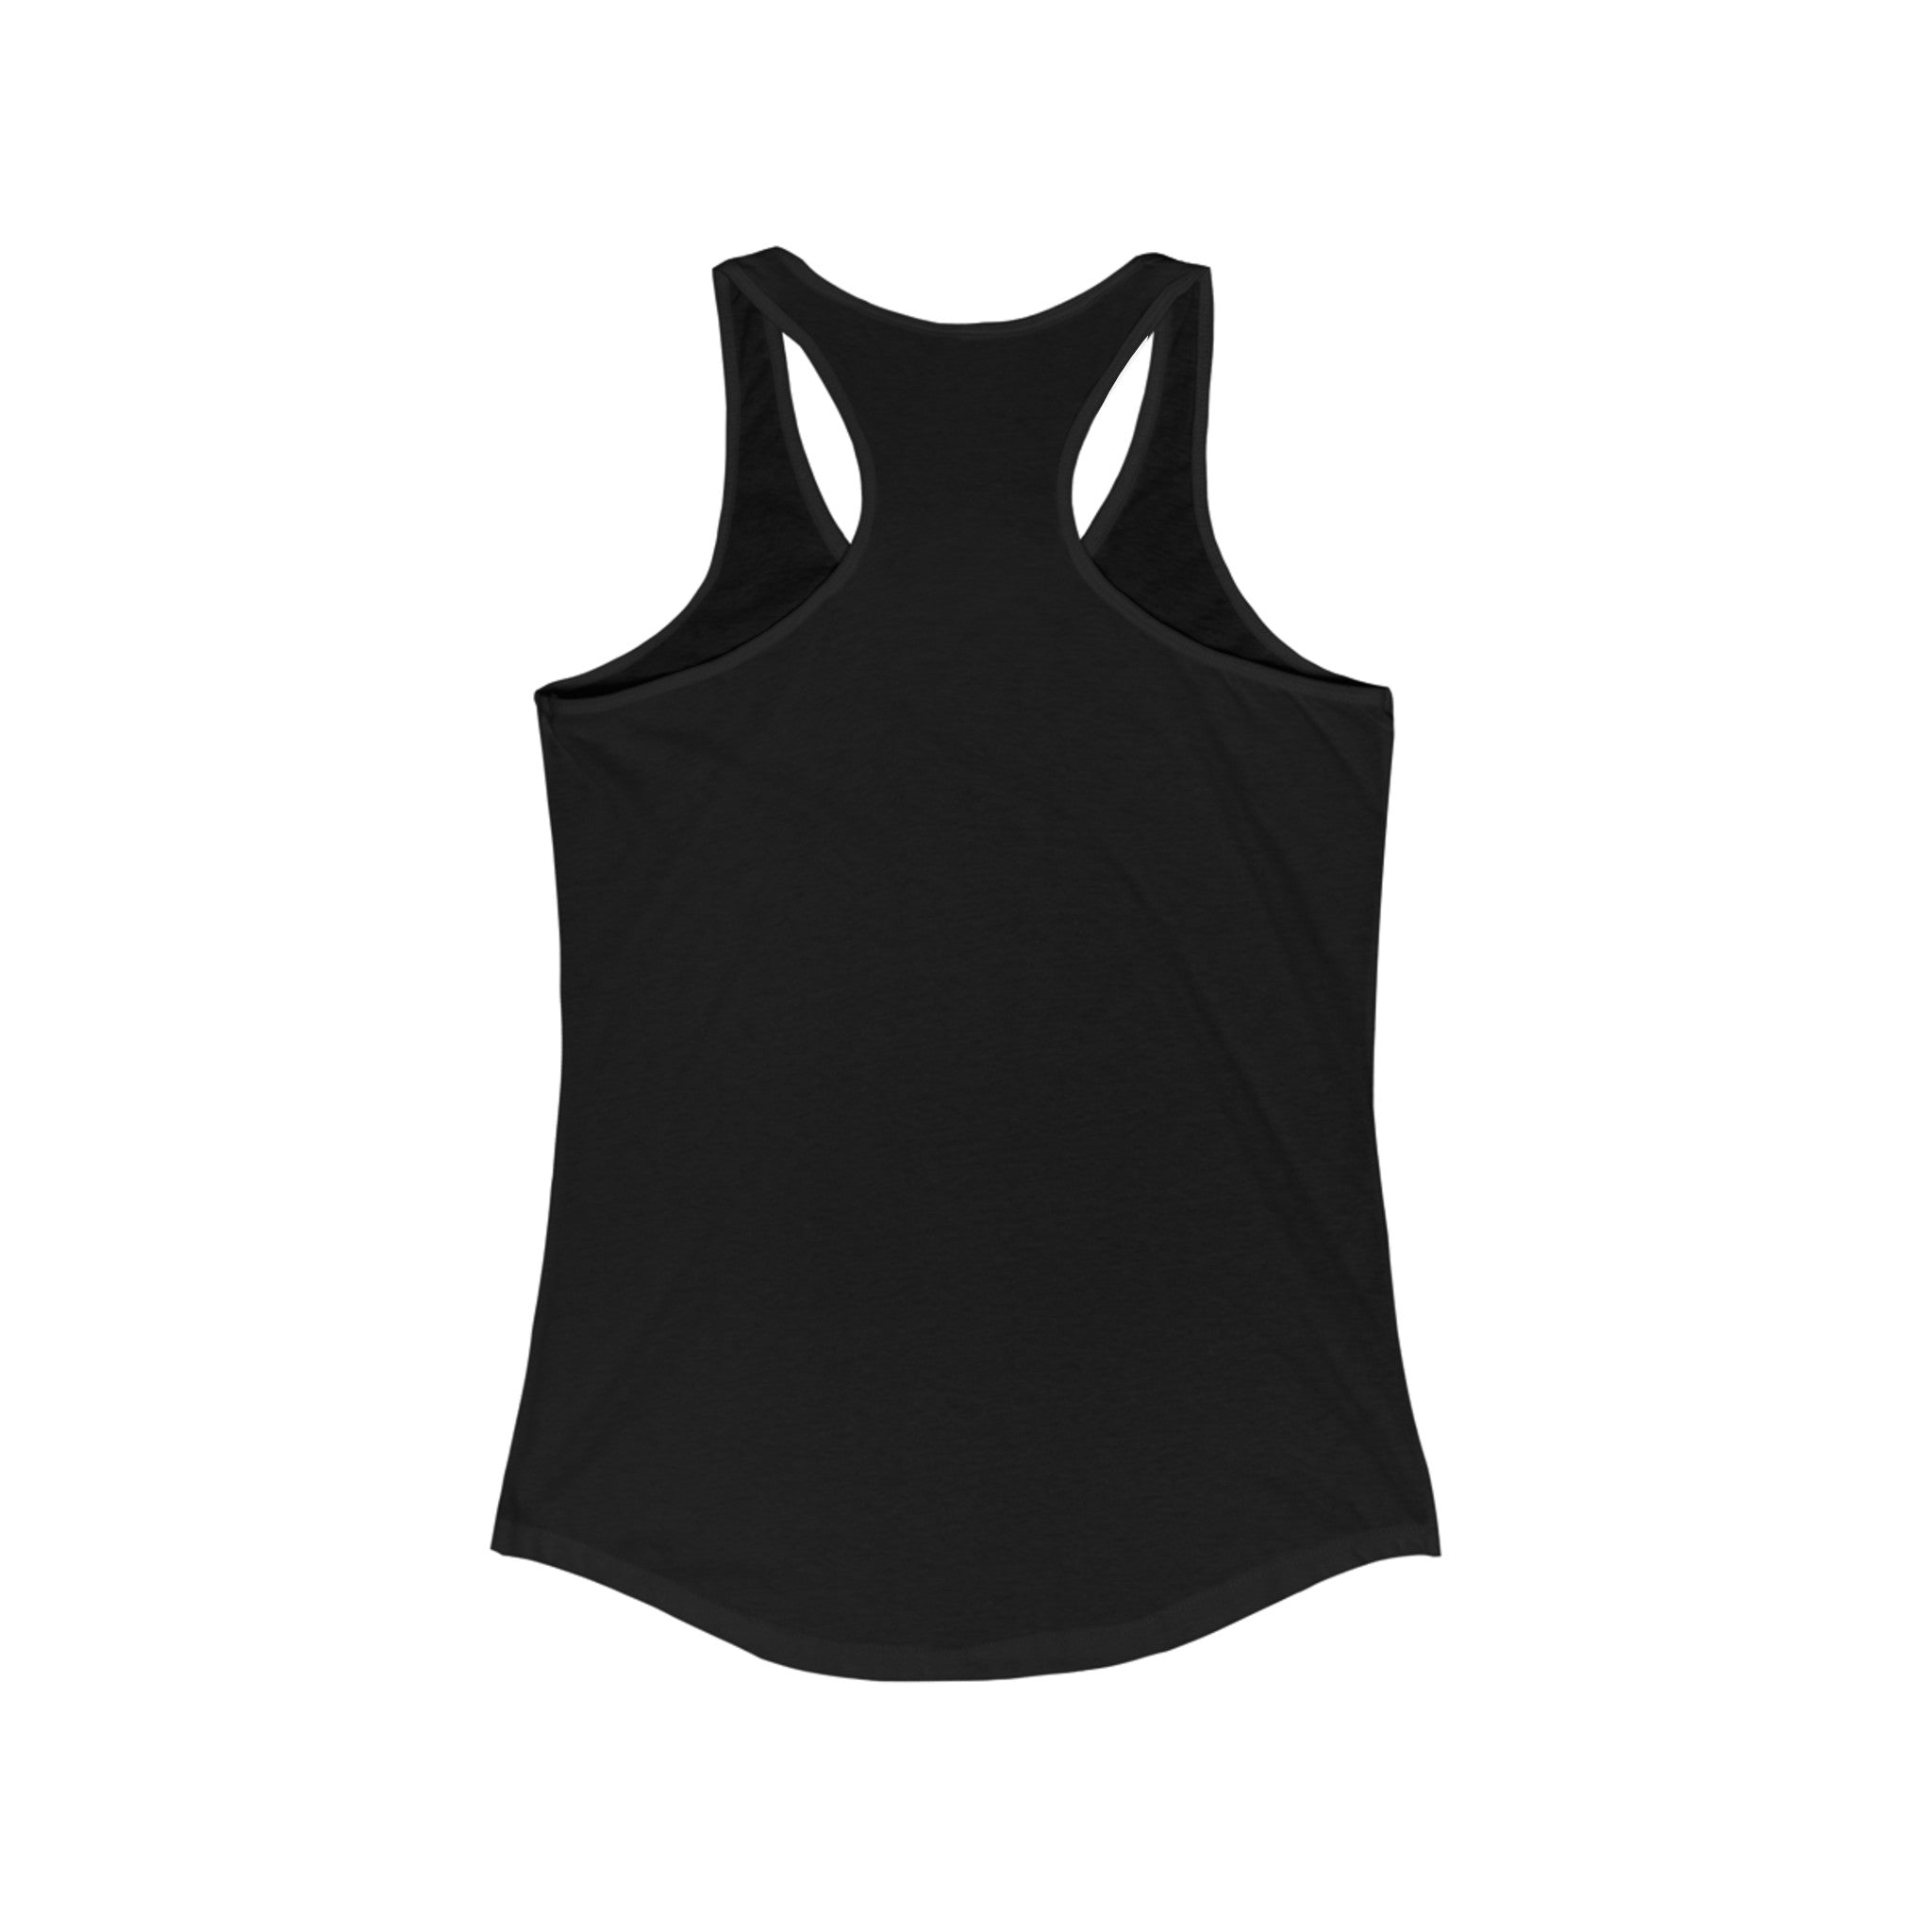 A black, sleeveless RU - Women's Racerback Tank is displayed on a plain white background, showcasing stylish activewear perfect for your next workout.